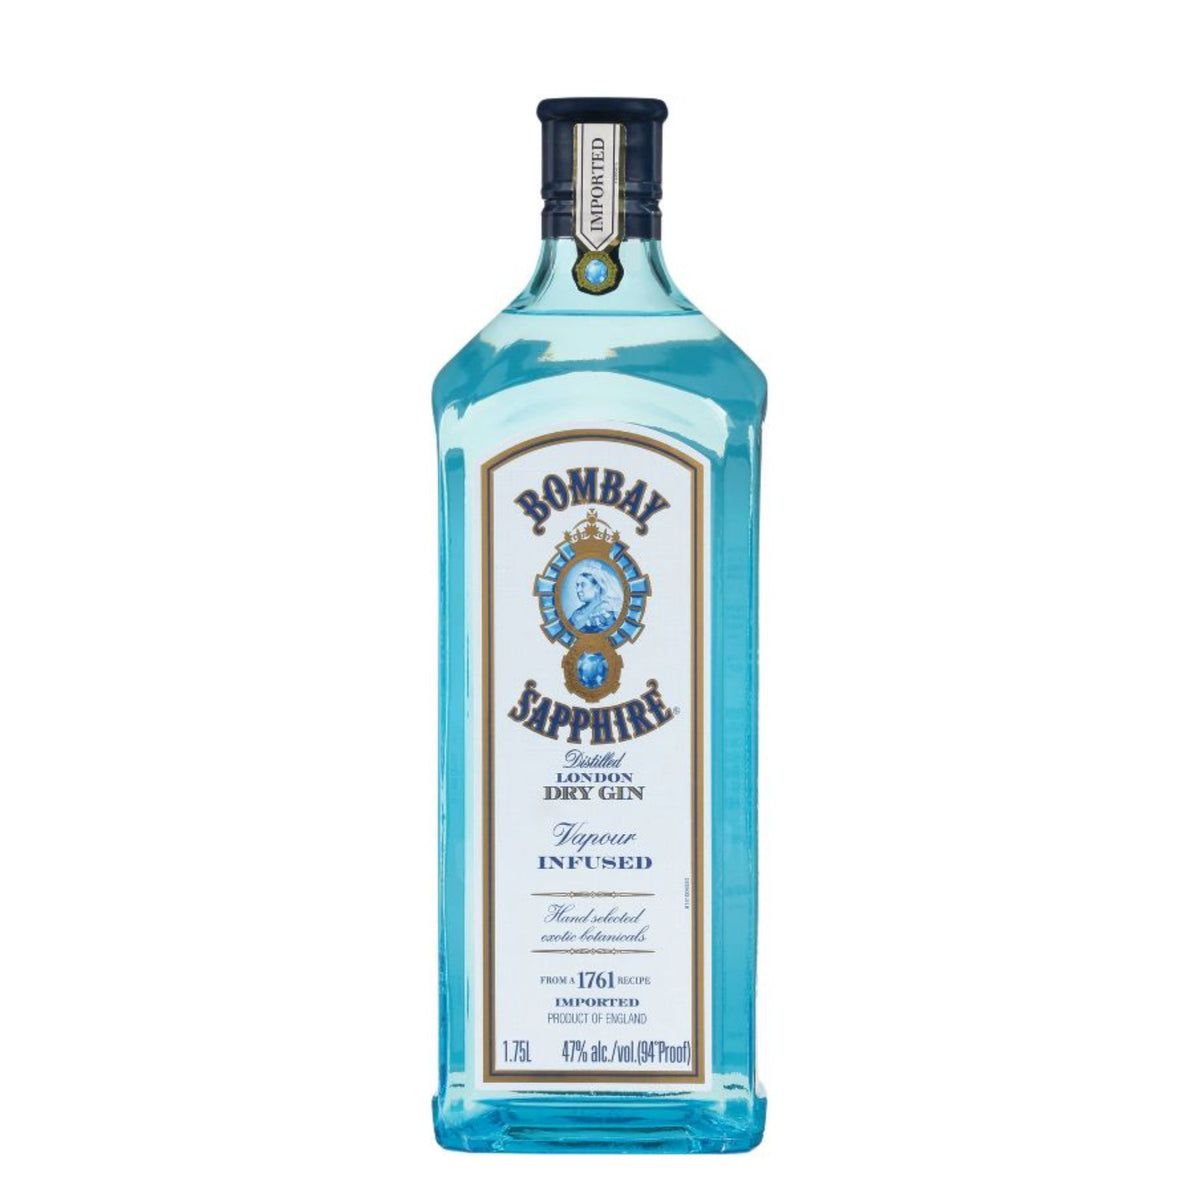 Liter 1.75 Rare Gin — Sapphire Bombay Dry Tequilas